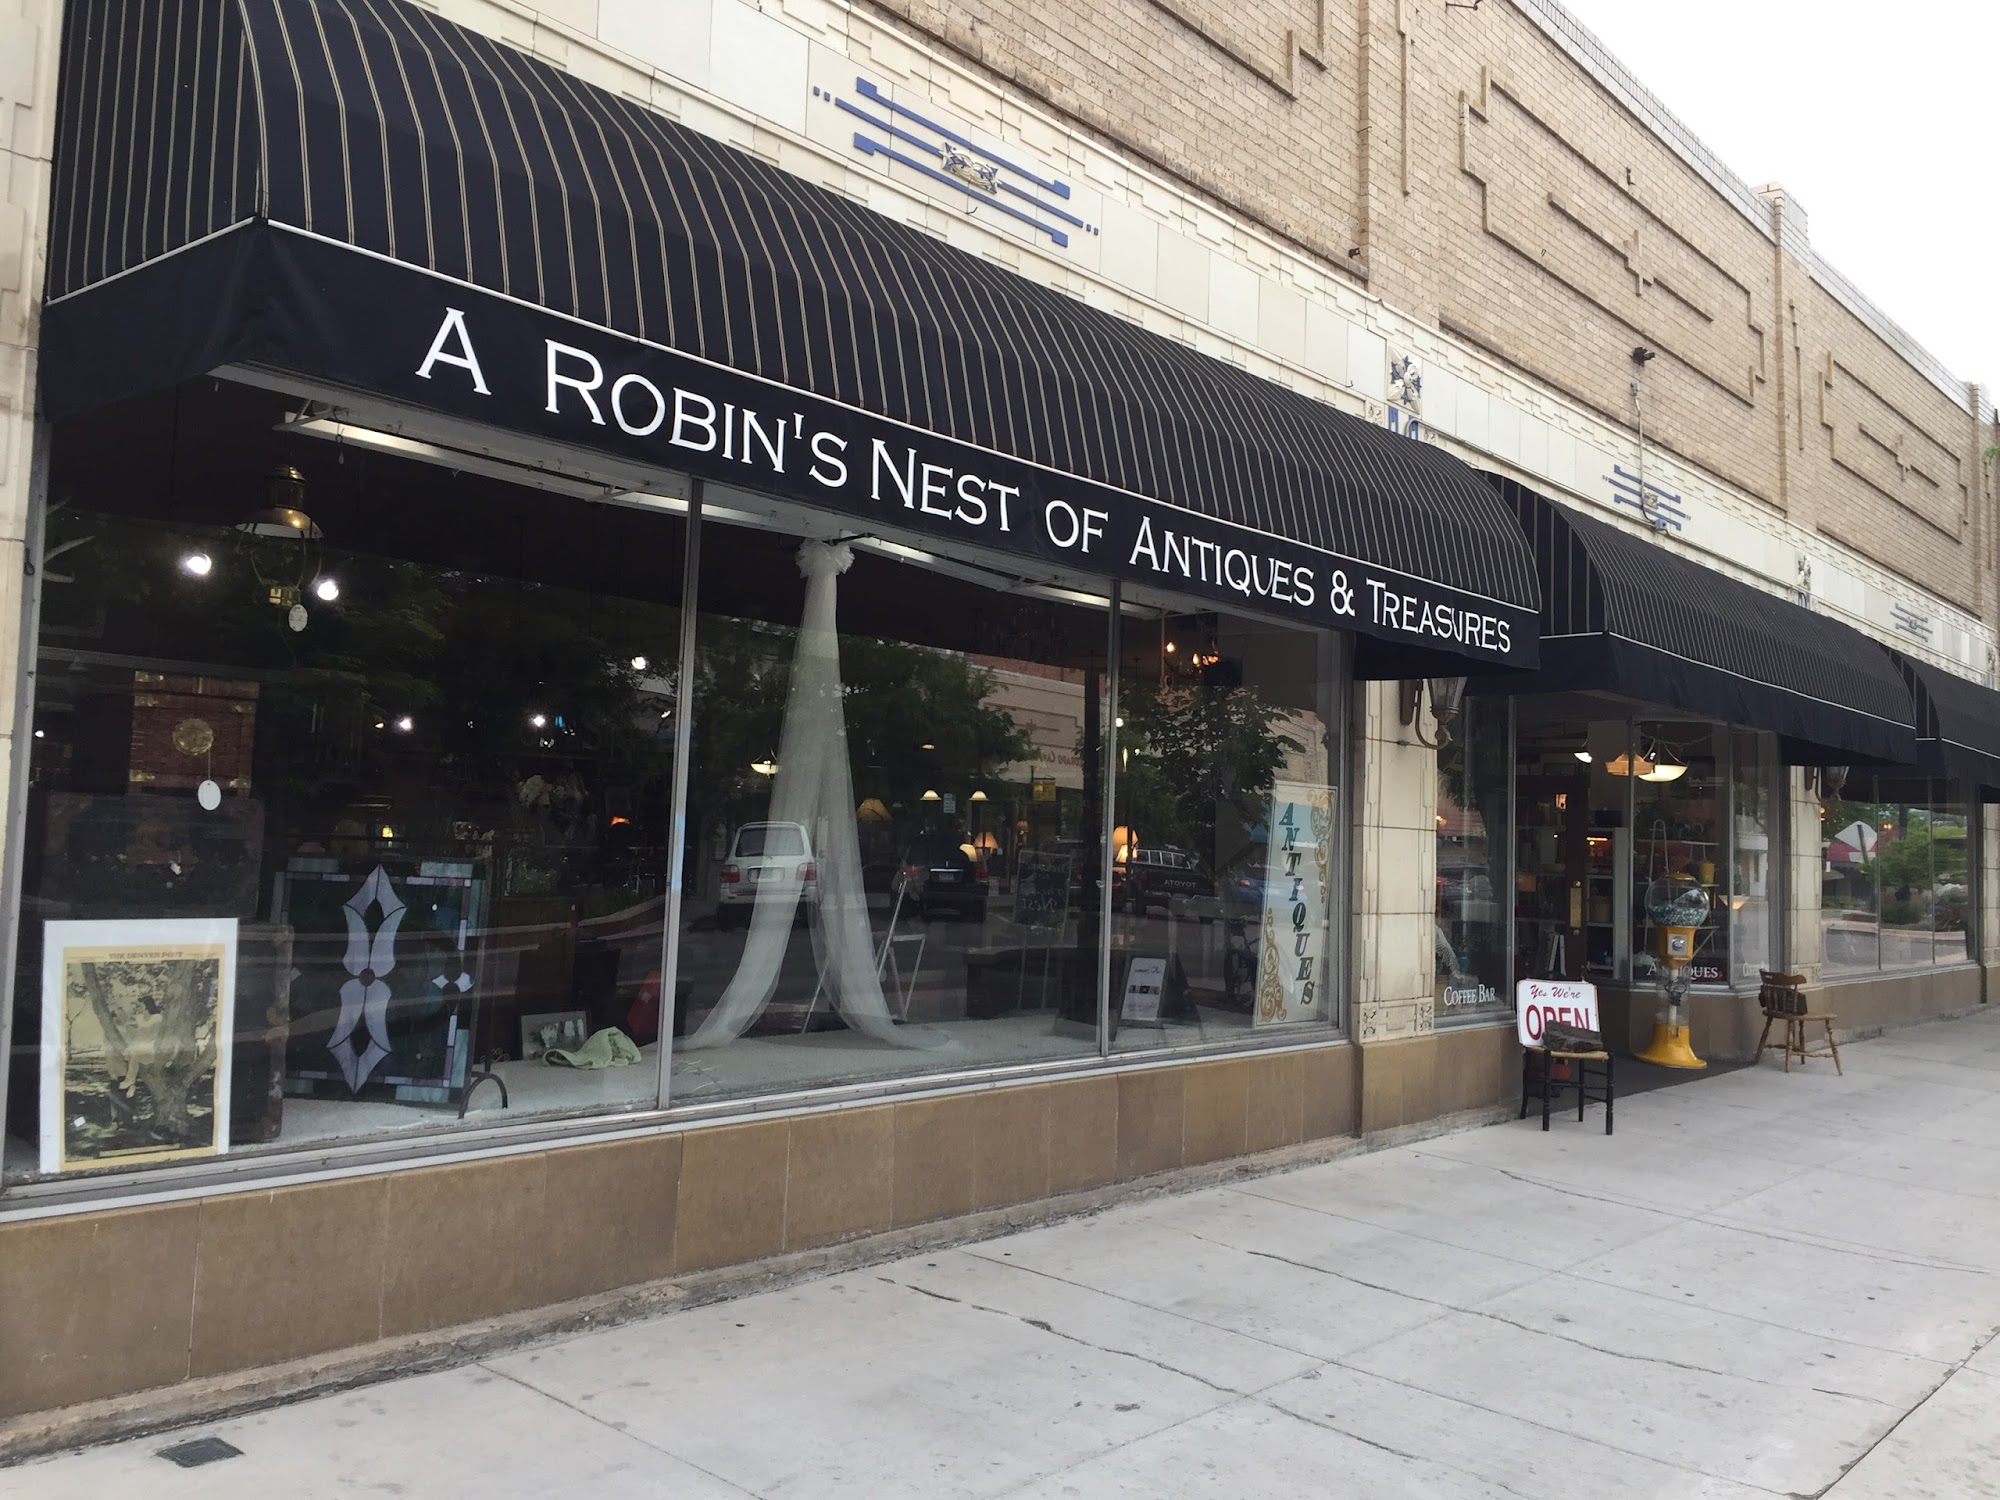 A Robin's Nest of Antiques & Treasures